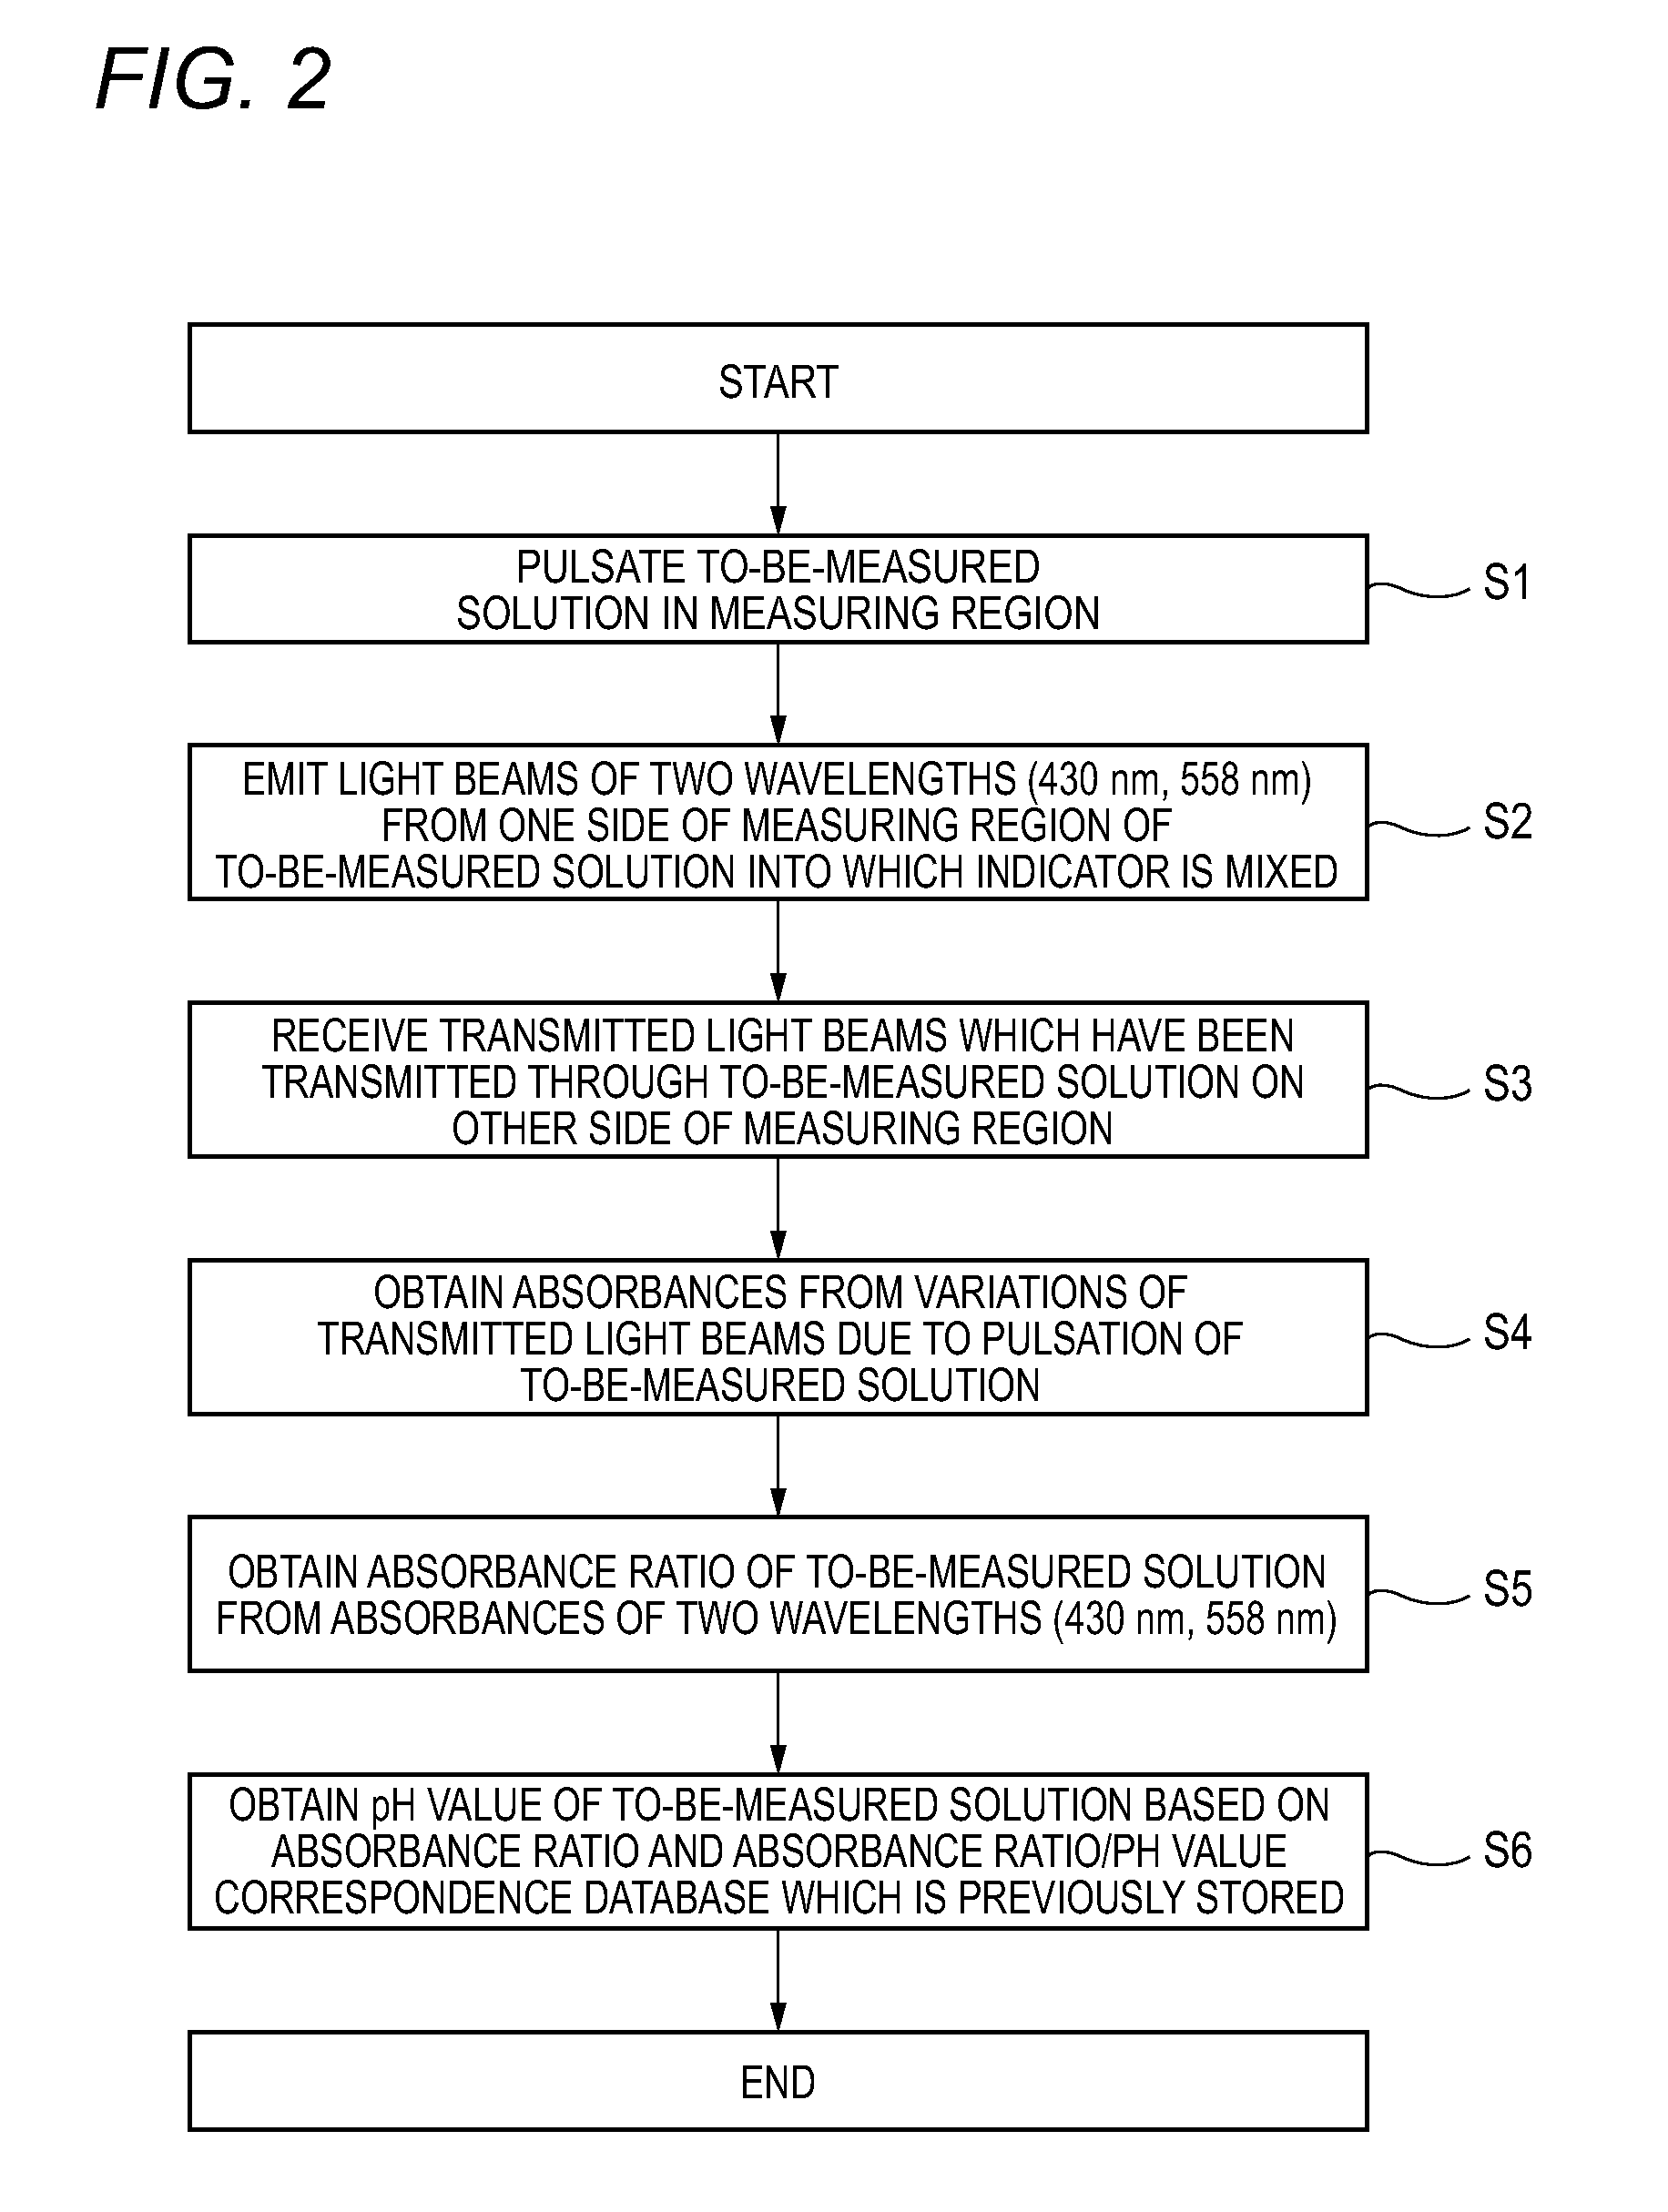 Method and apparatus for measuring ph of solution